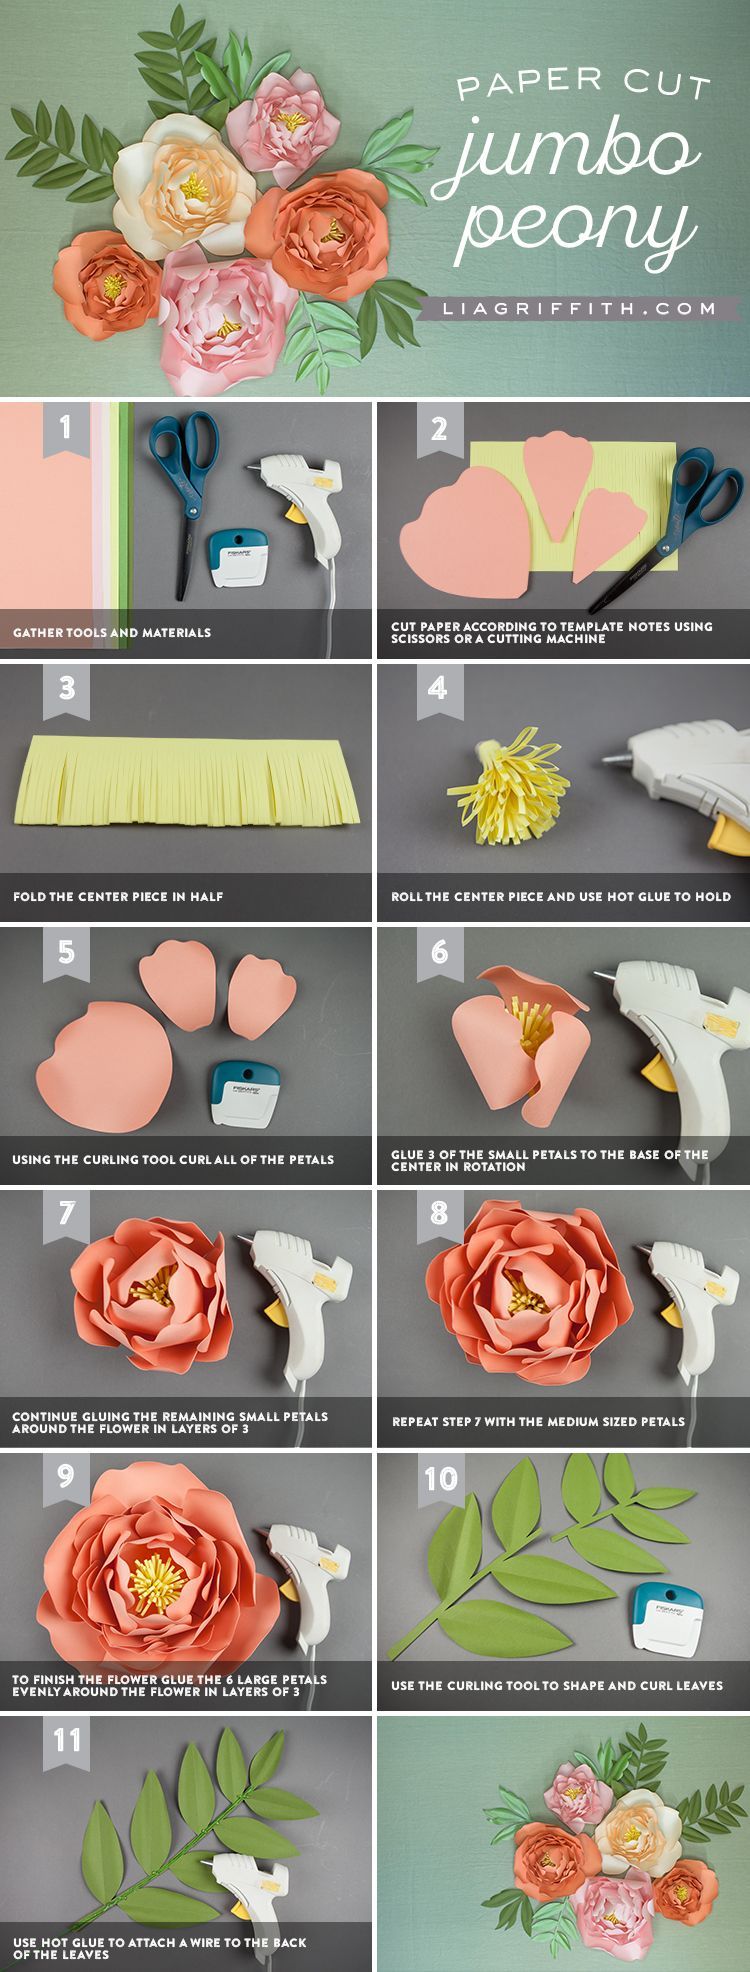 Have Floral Fun with This Paper Jumbo Peonies Backdrop -   19 diy paper peonies
 ideas